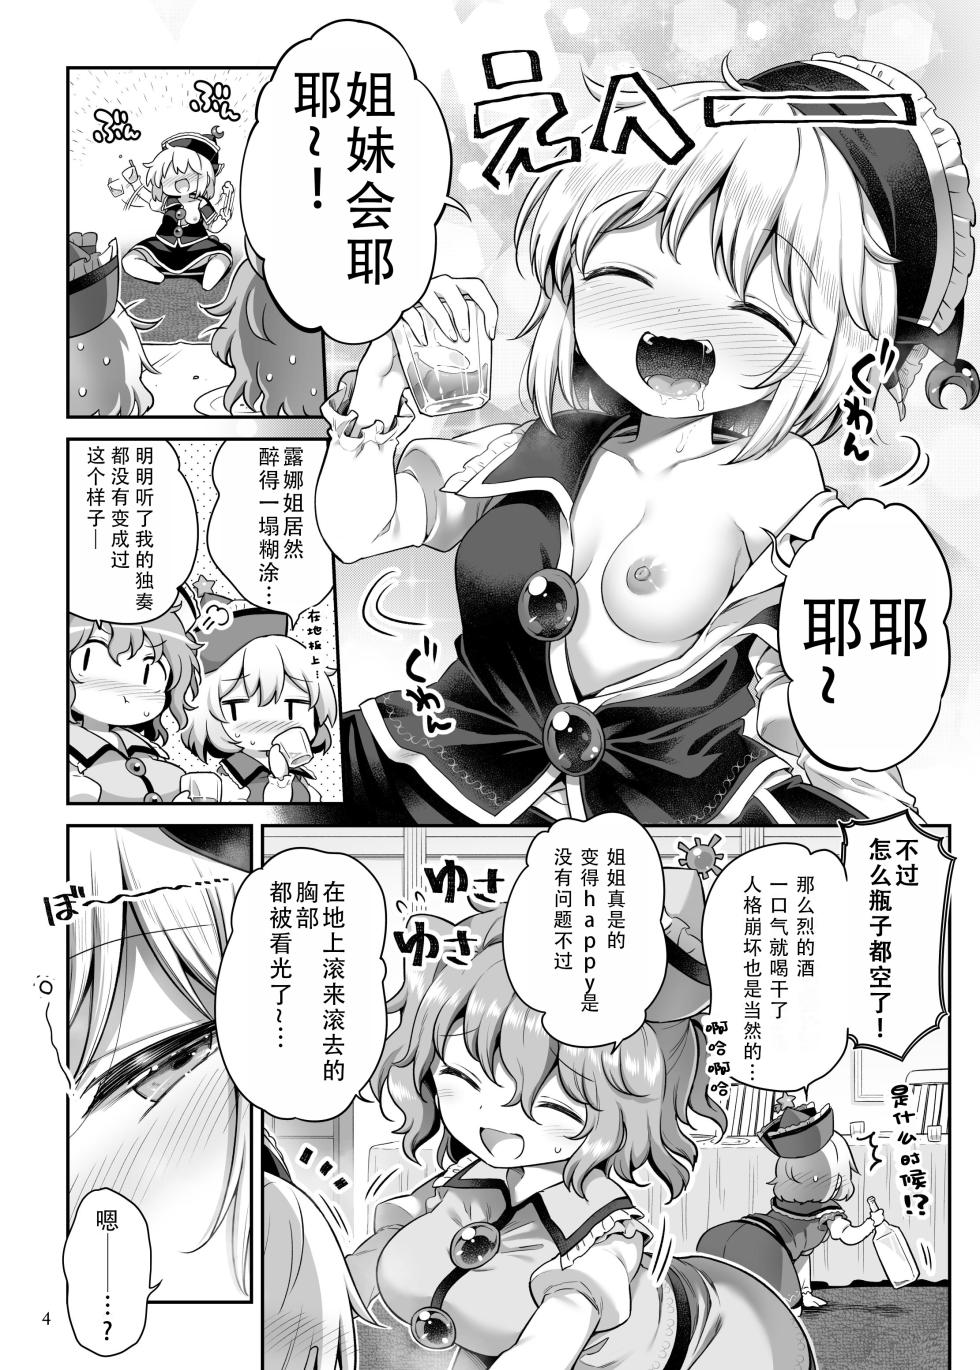 [Unmei no Ikasumi (Harusame)] PrismLiquor Abuse | 普莉兹姆利巴醉酒记 (Touhou Project) [Chinese] [茄某人个人汉化] [Digital] - Page 3